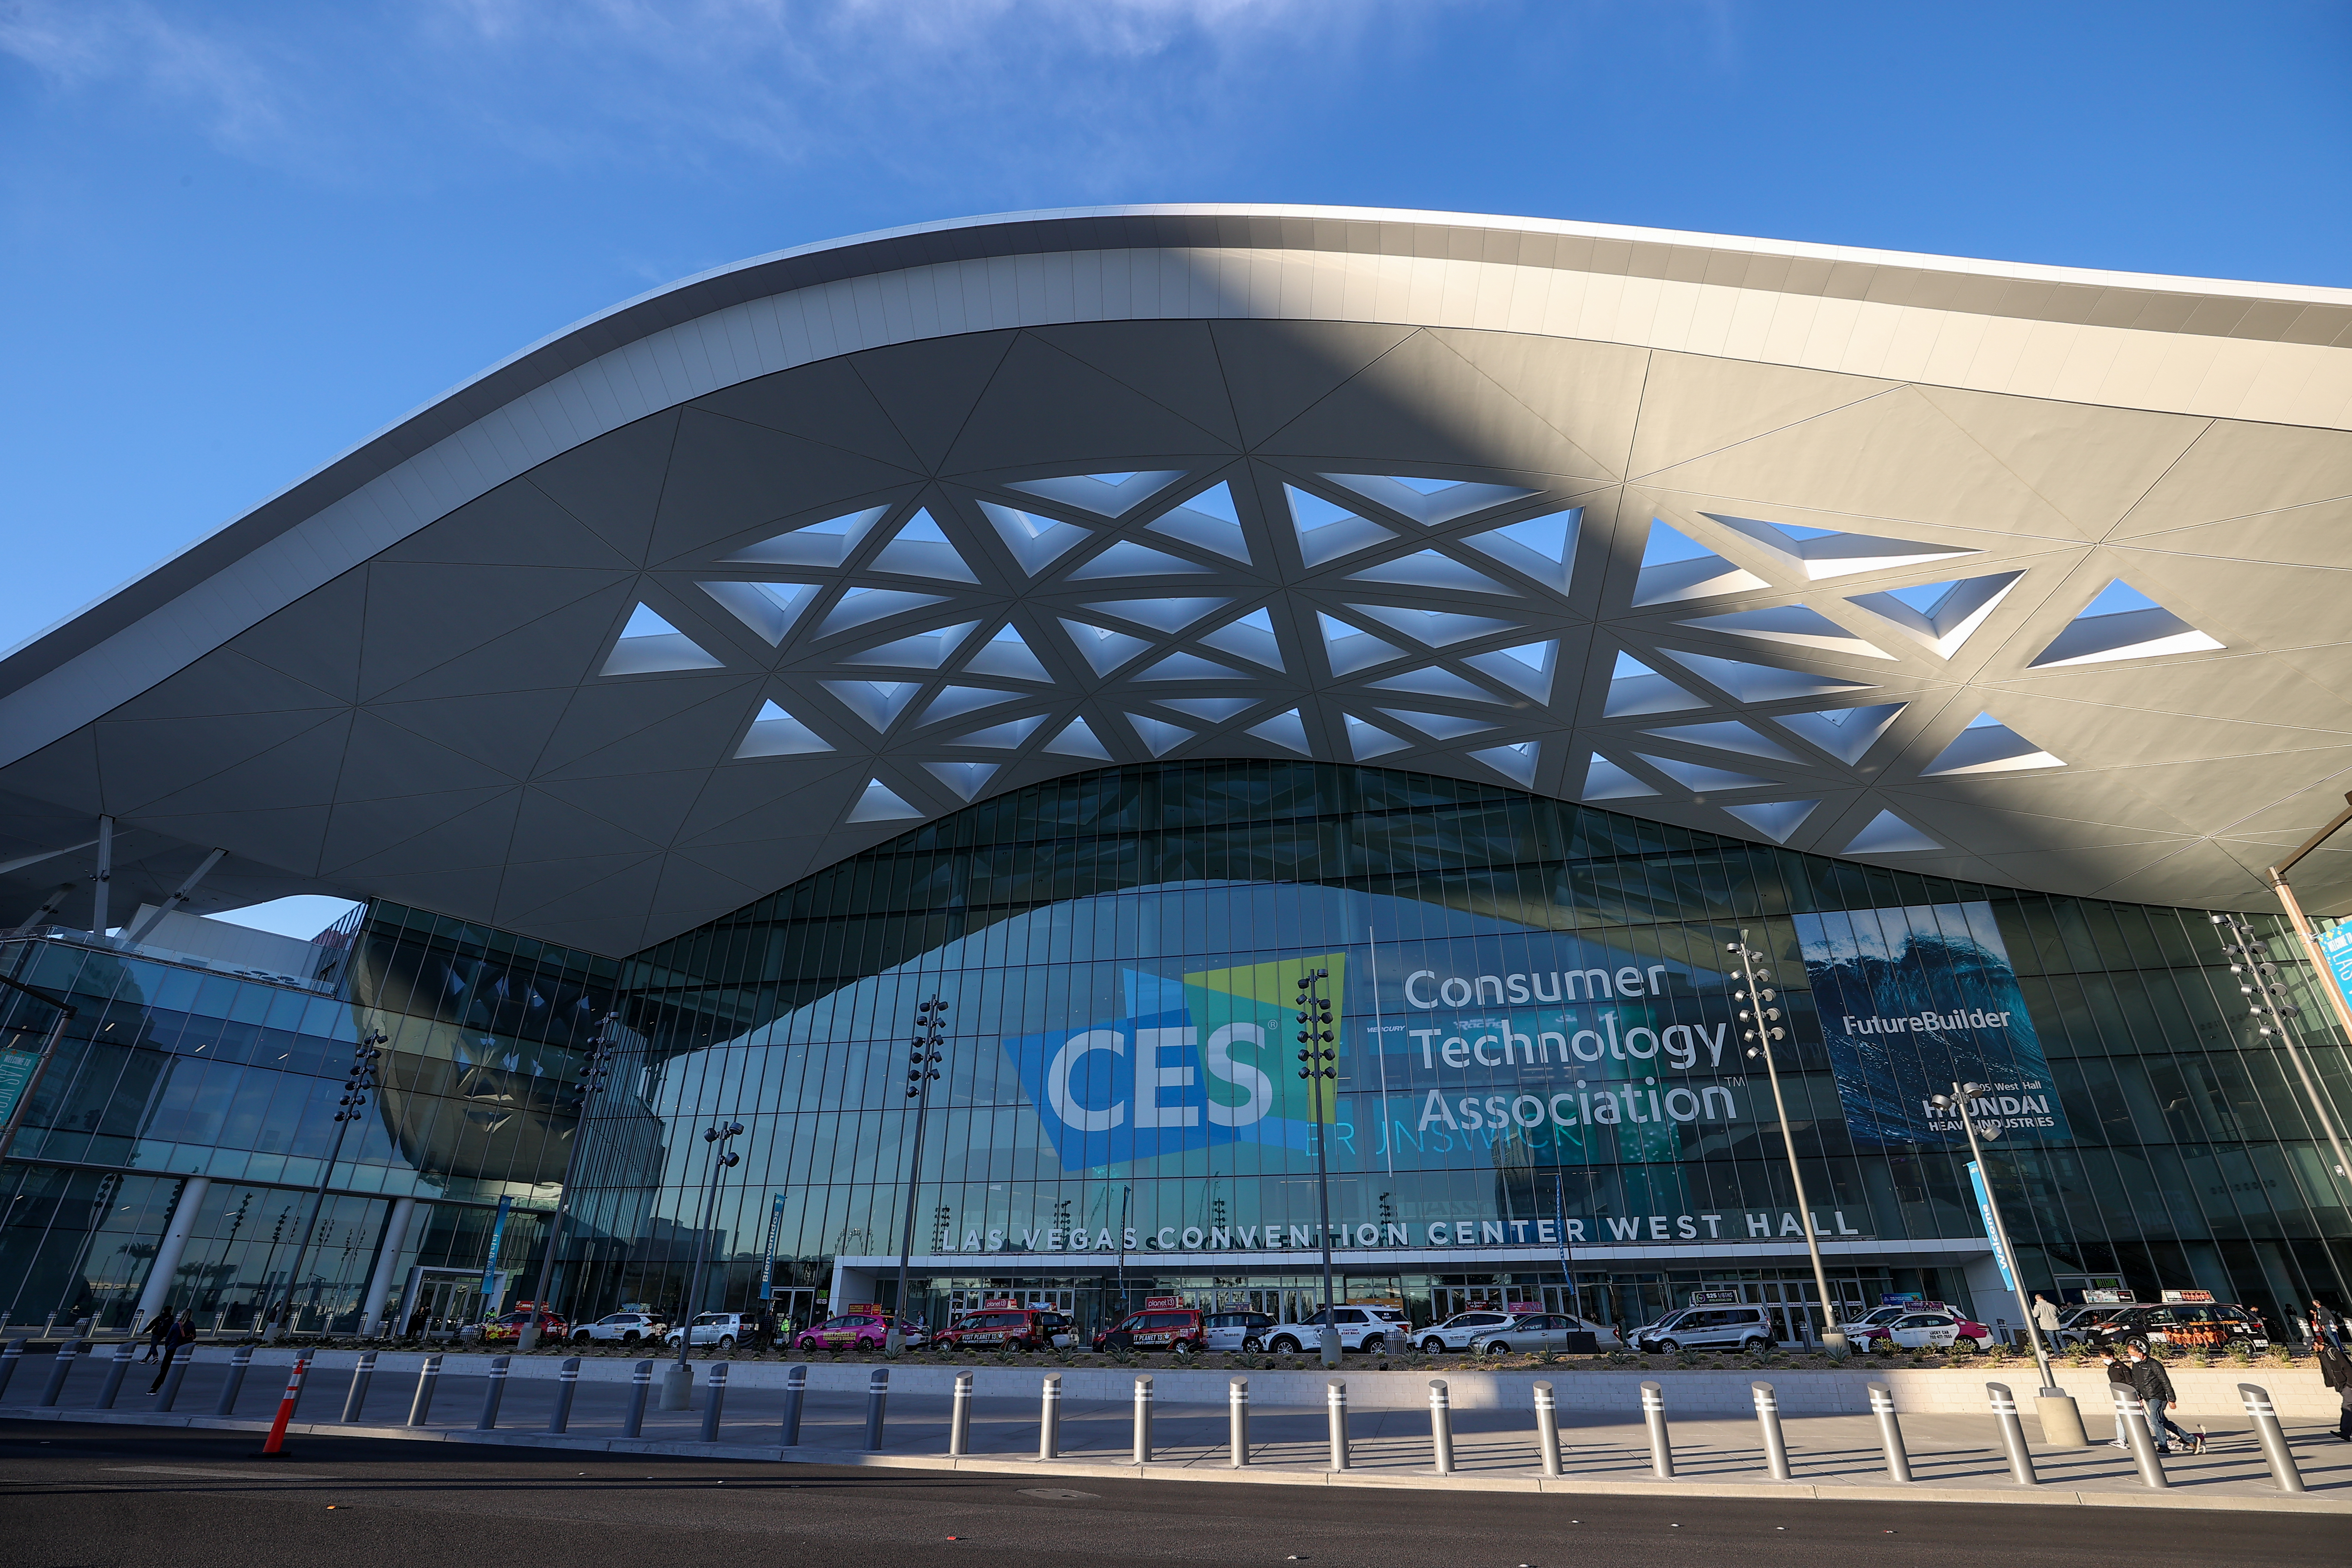 LAS VEGAS, NEVADA - JANUARY 5: CES, the world's largest annual consumer technology trade show opens its door to visitors on January 5, 2022 at the Las Vegas Convention Center in Las Vegas, Nevada, United States. (Photo by Tayfun Coskun/Anadolu Agency via Getty Images)